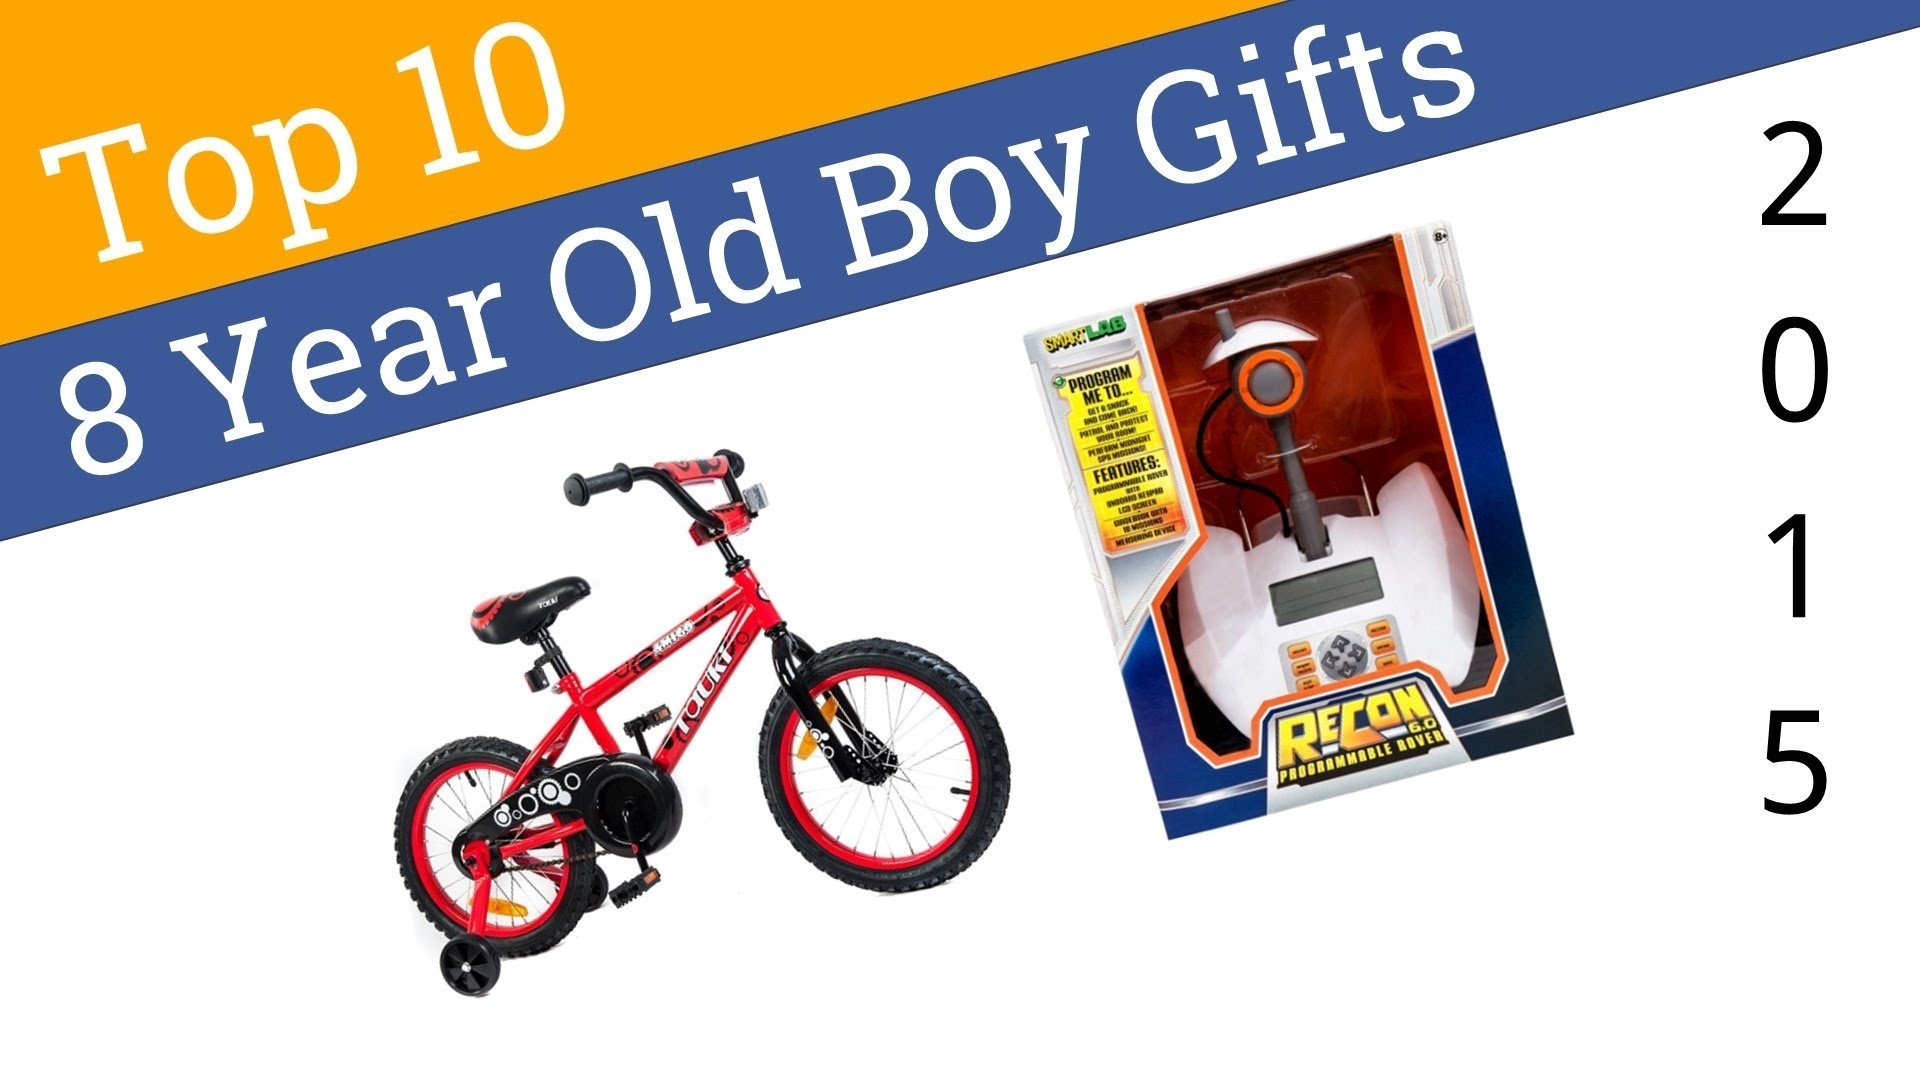 10 Attractive Christmas Ideas For 8 Year Old Boy 10 best 8 year old boy gifts 2015 youtube 1 2022